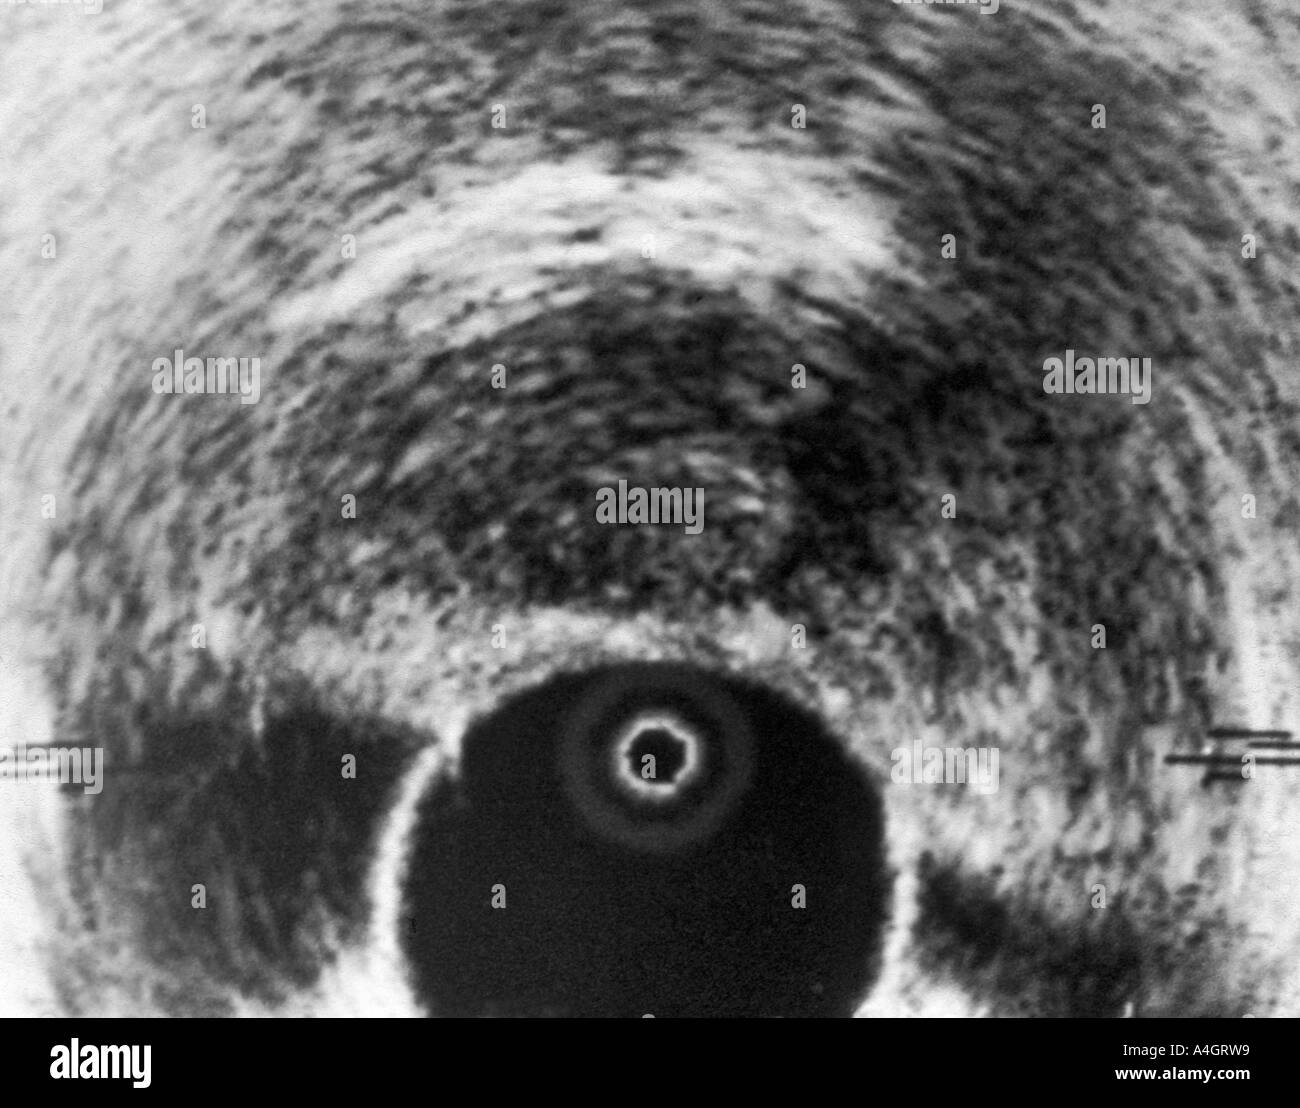 A transrectal ultrasound scan (TRUS) of the prostate showing cancer of the prostate. Stock Photo